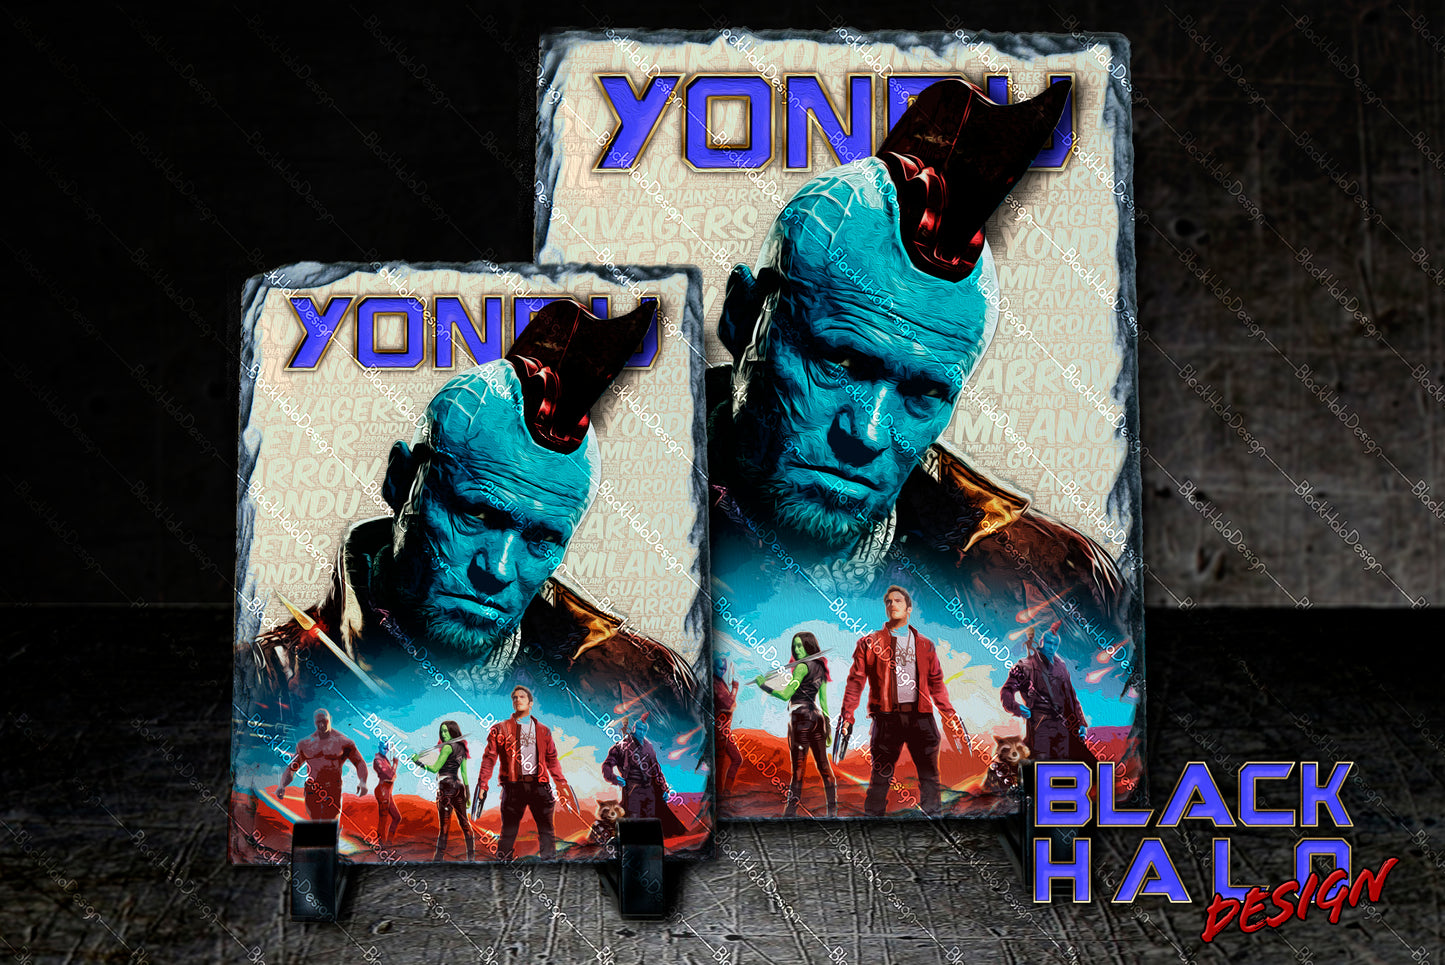 Guardians of the Galaxy Inspired Yondu artwork on Solid Rock Slate